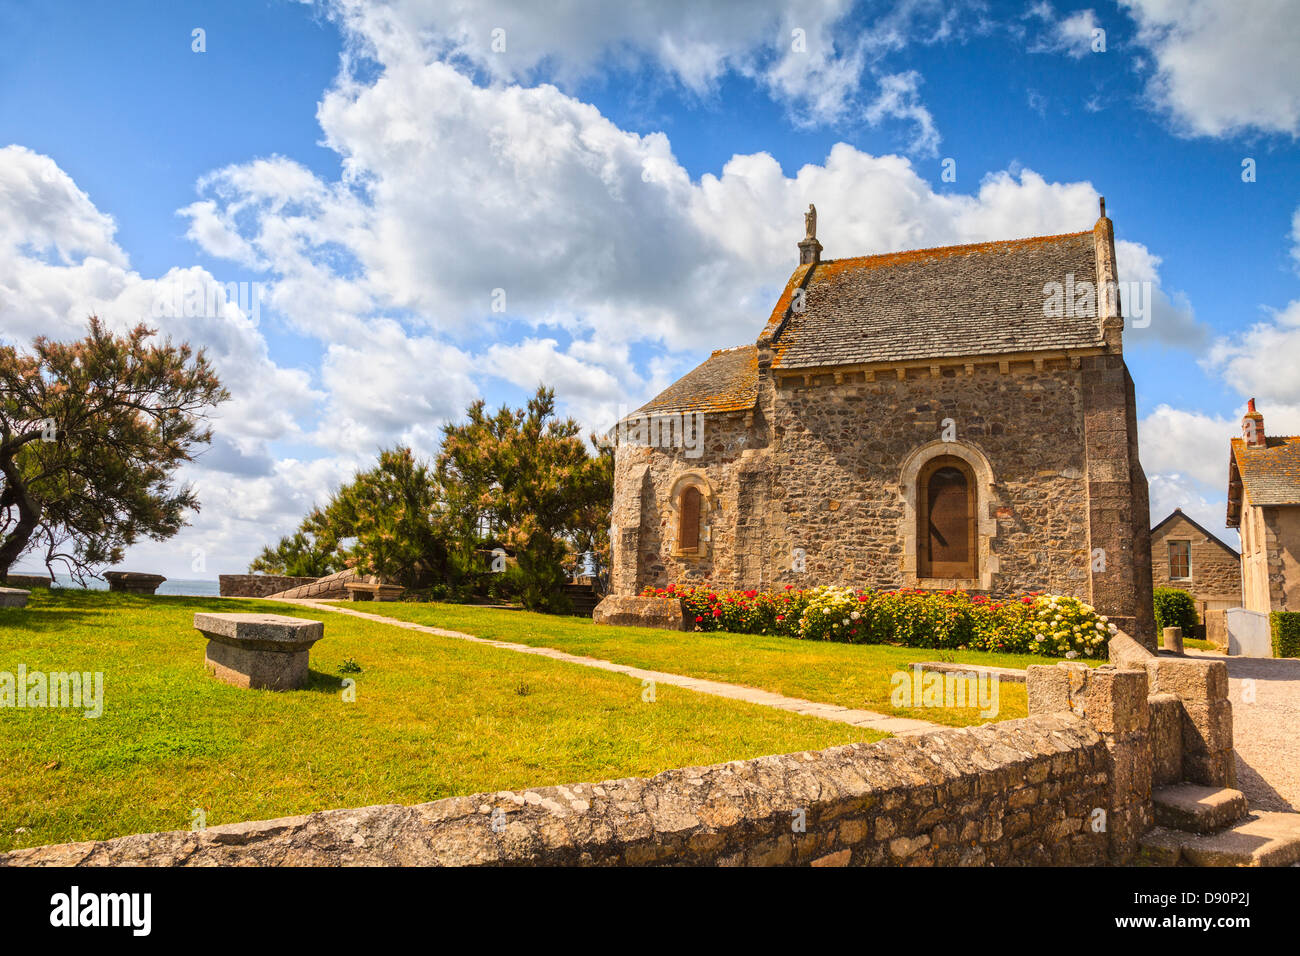 The Roman style Sailors Chapel at the small fishing port of St-Vaast-La-Hougue, Normandy, France. This was originally the... Stock Photo